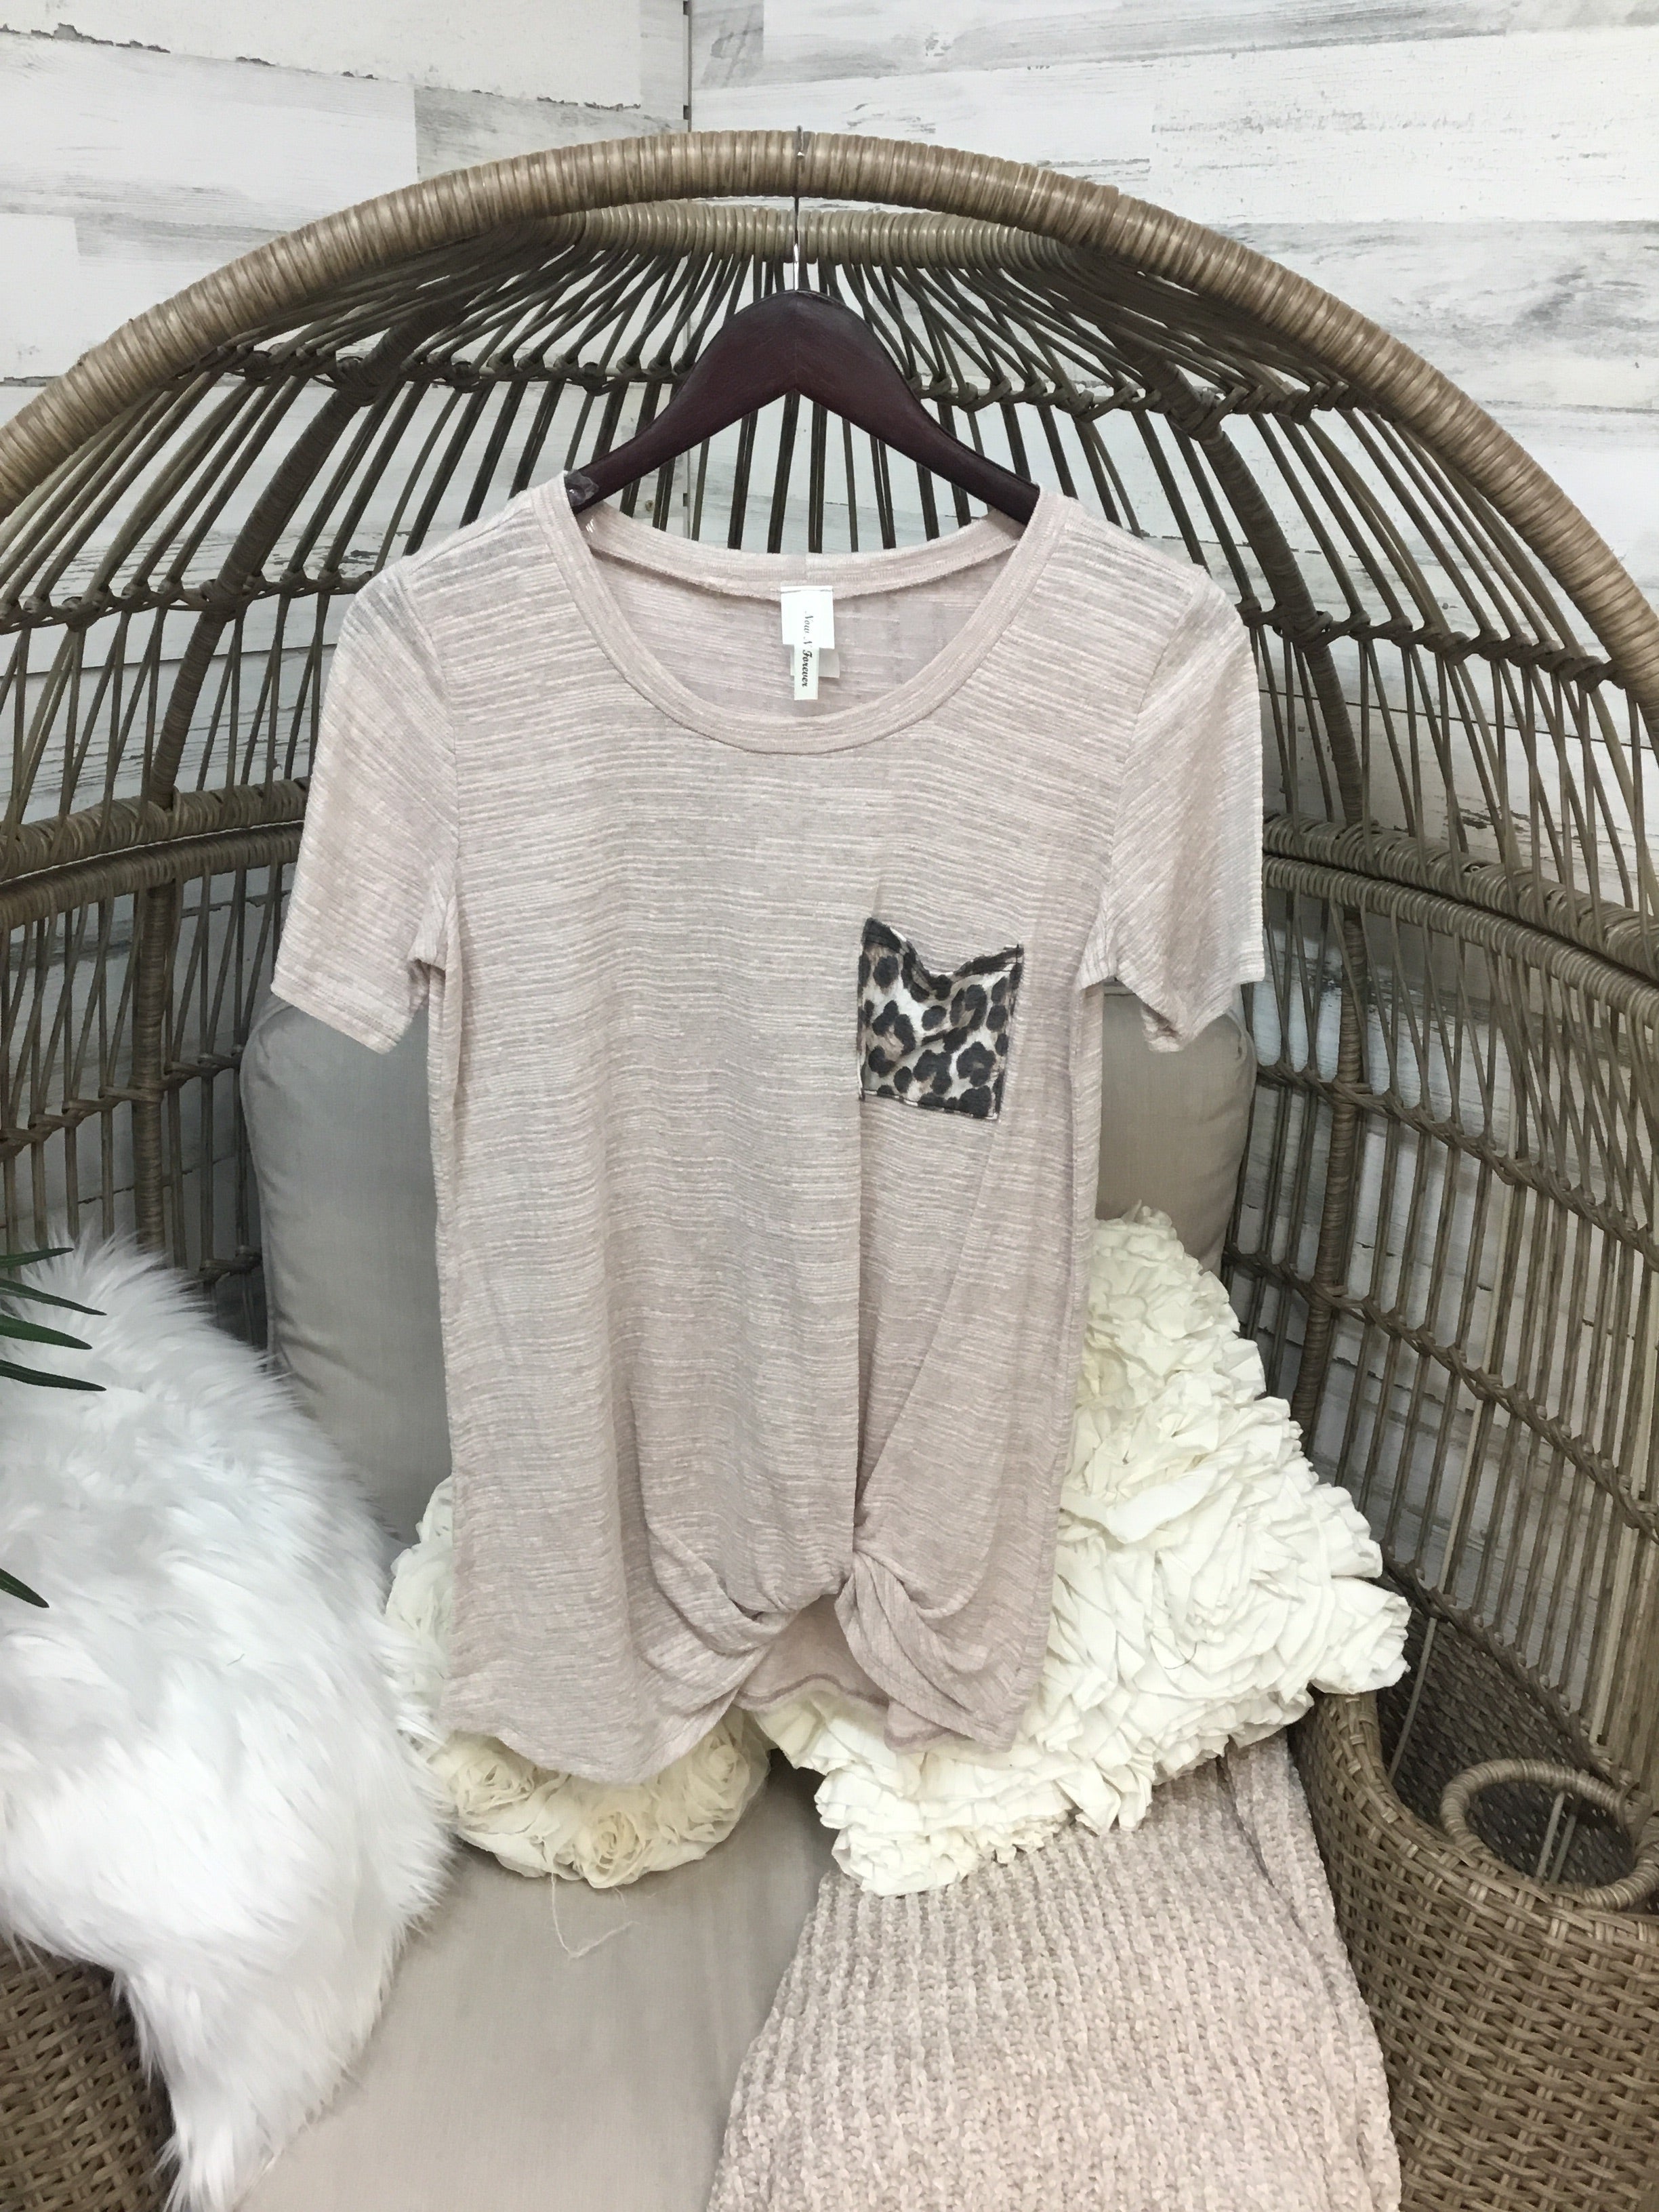 Leopard Pocket Tee with Knot Detail in Taupe - Giddy Up Glamour Boutique